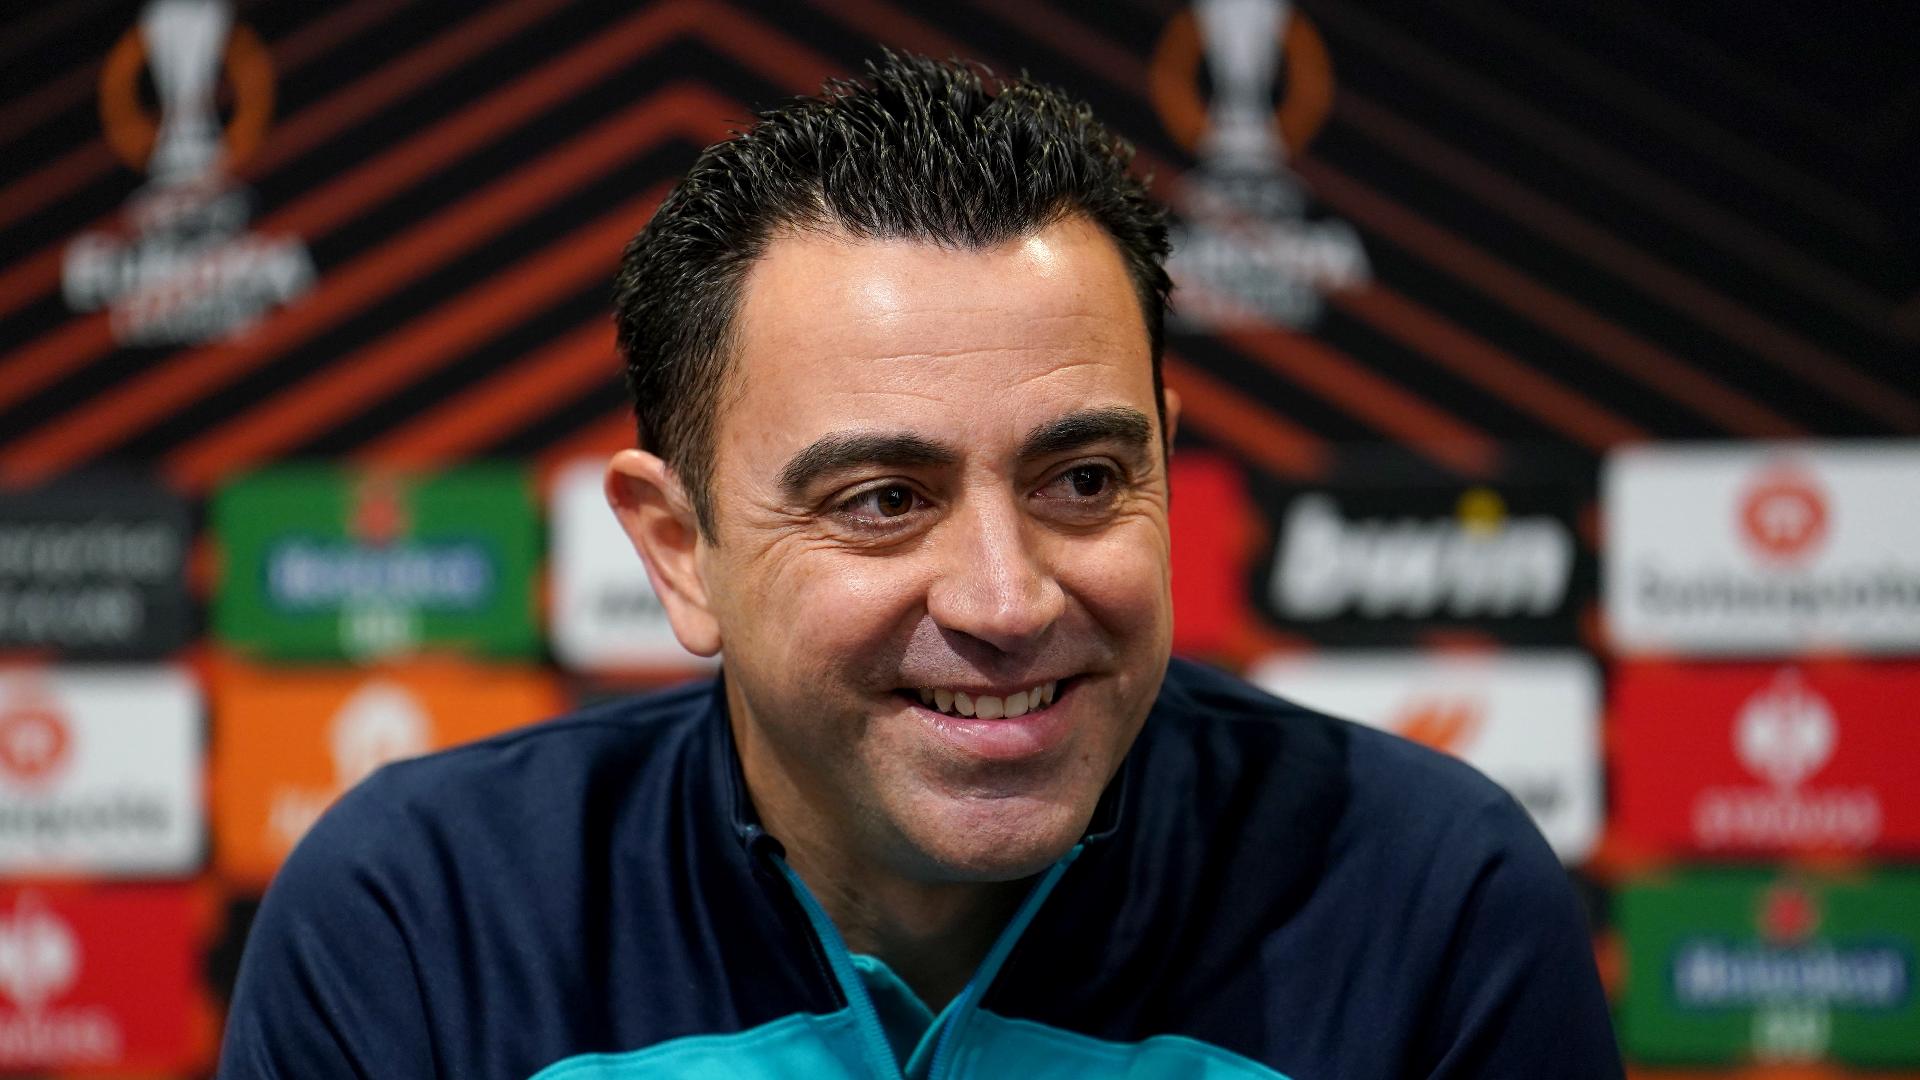 Xavi determined to put in more work after signing new Barcelona contract